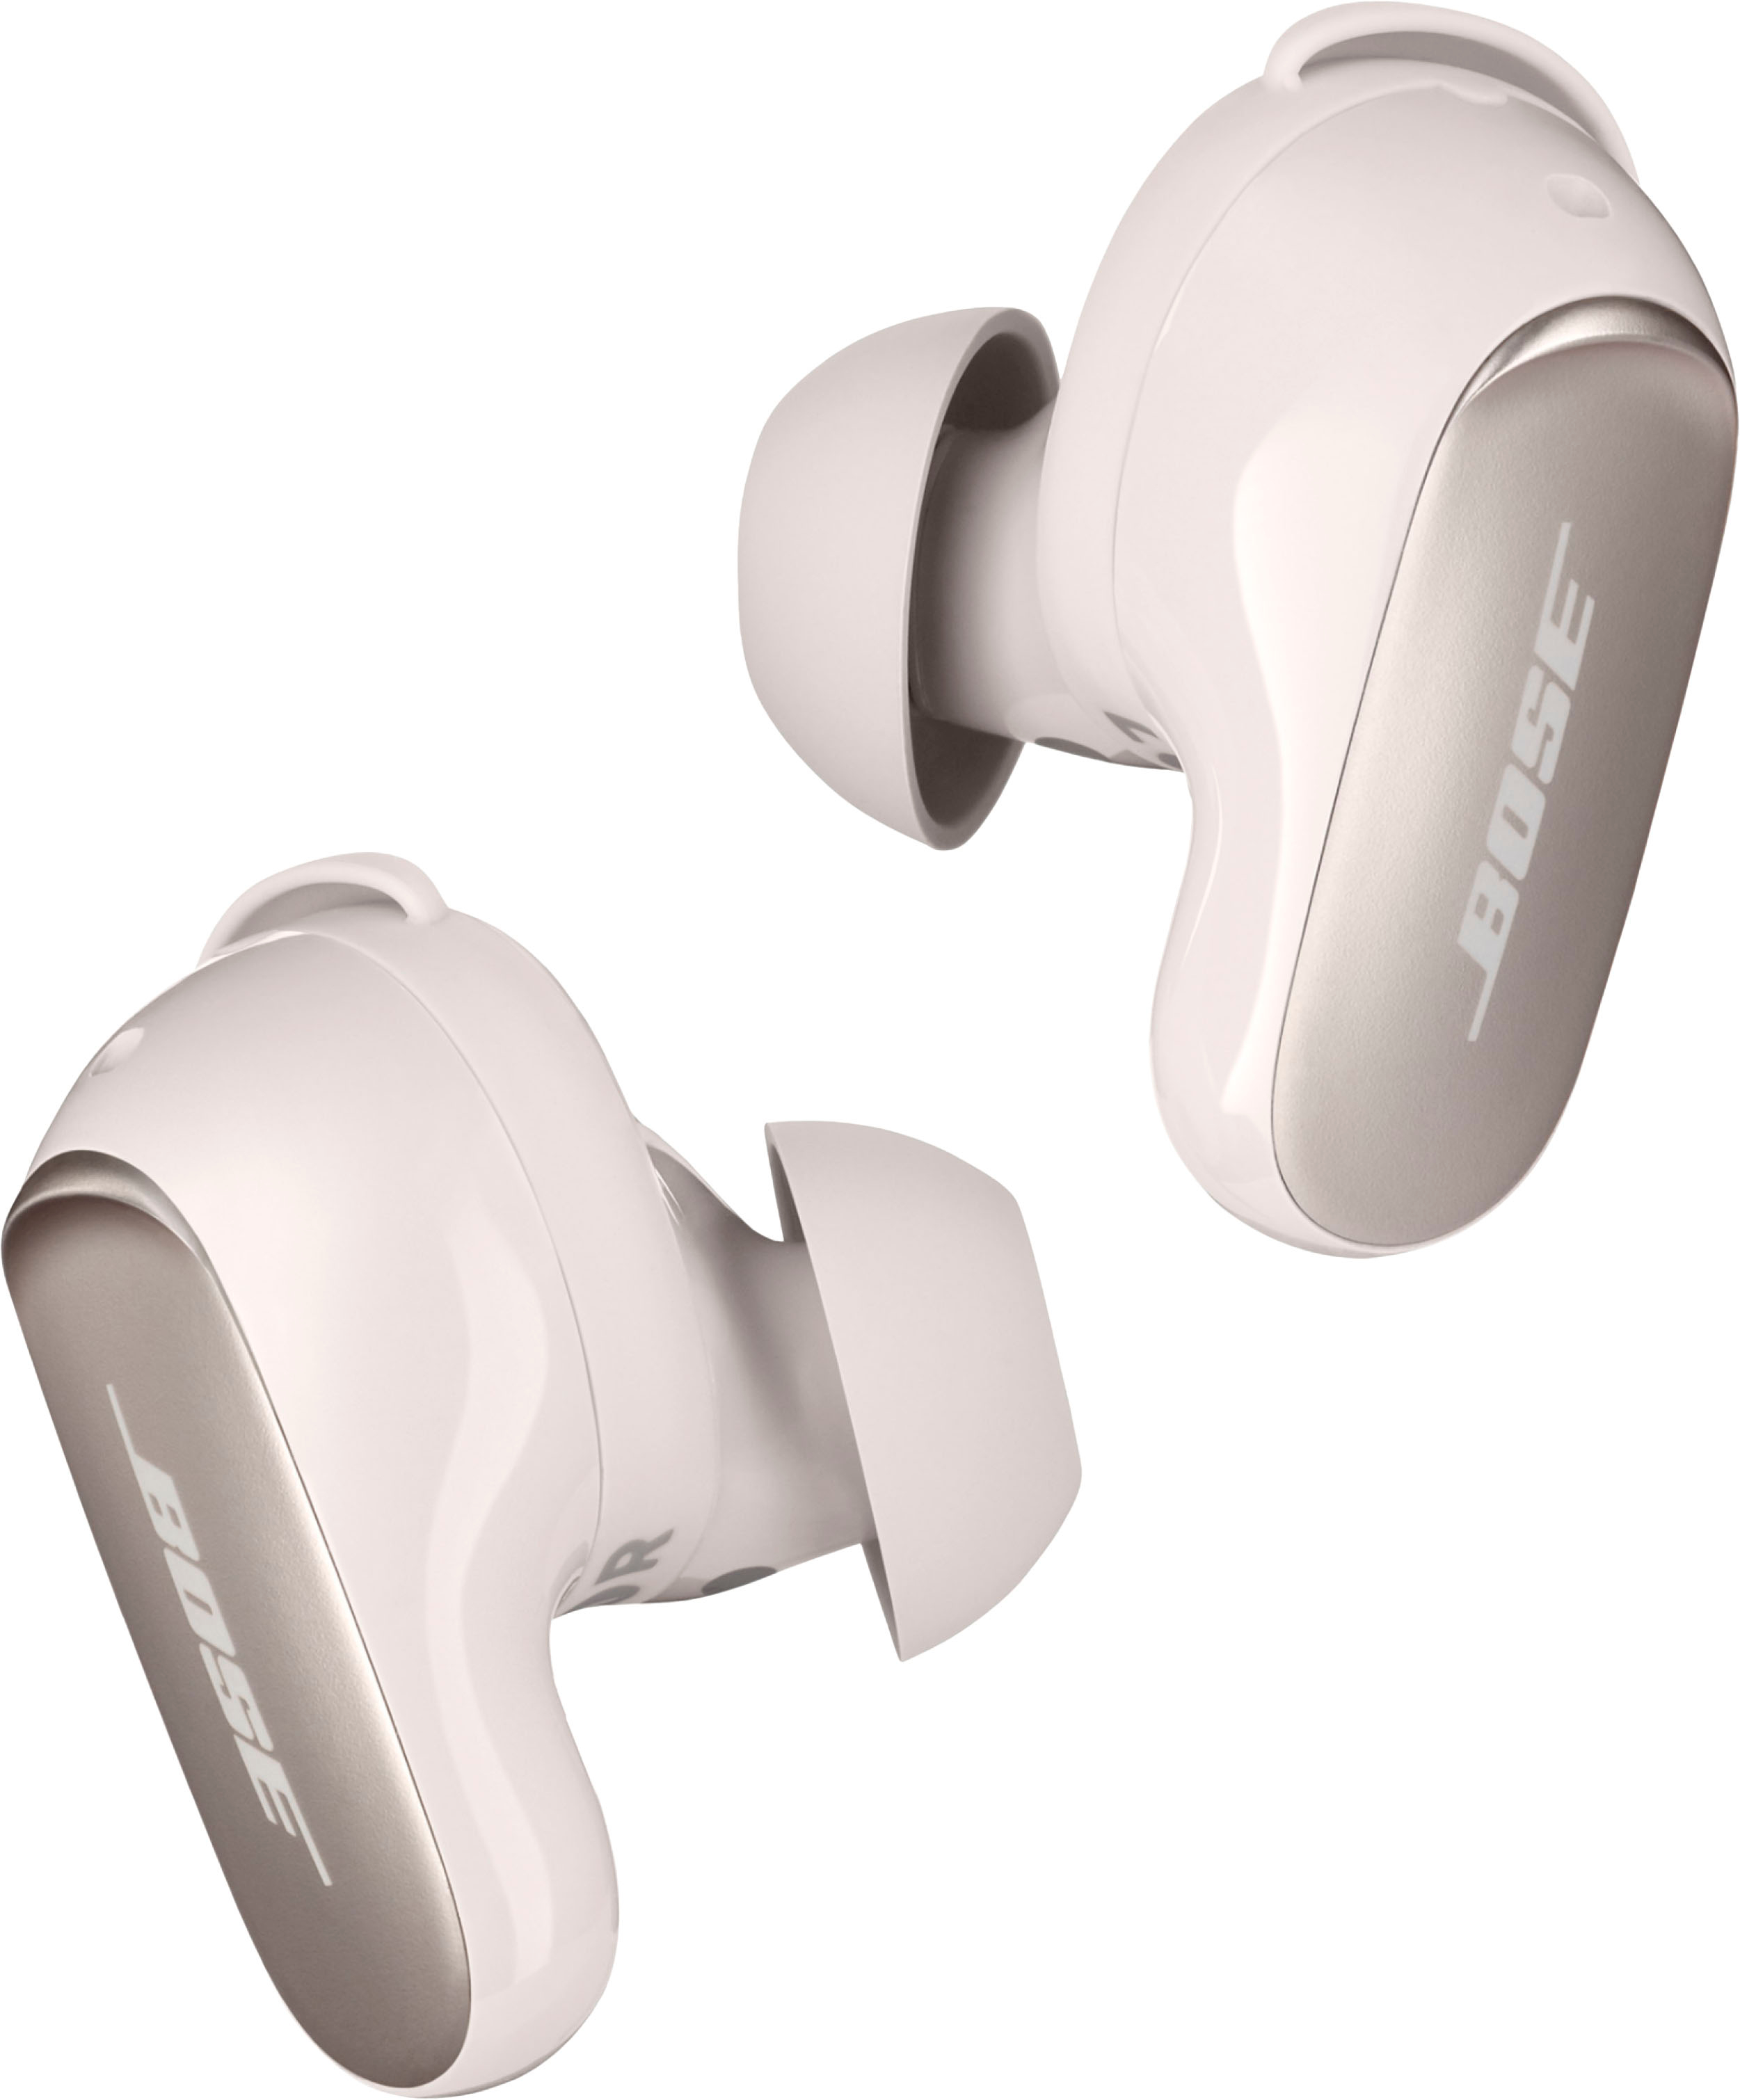 Bose QuietComfort Earbuds review: They beat AirPods Pro on sound and noise  canceling but not design - CNET